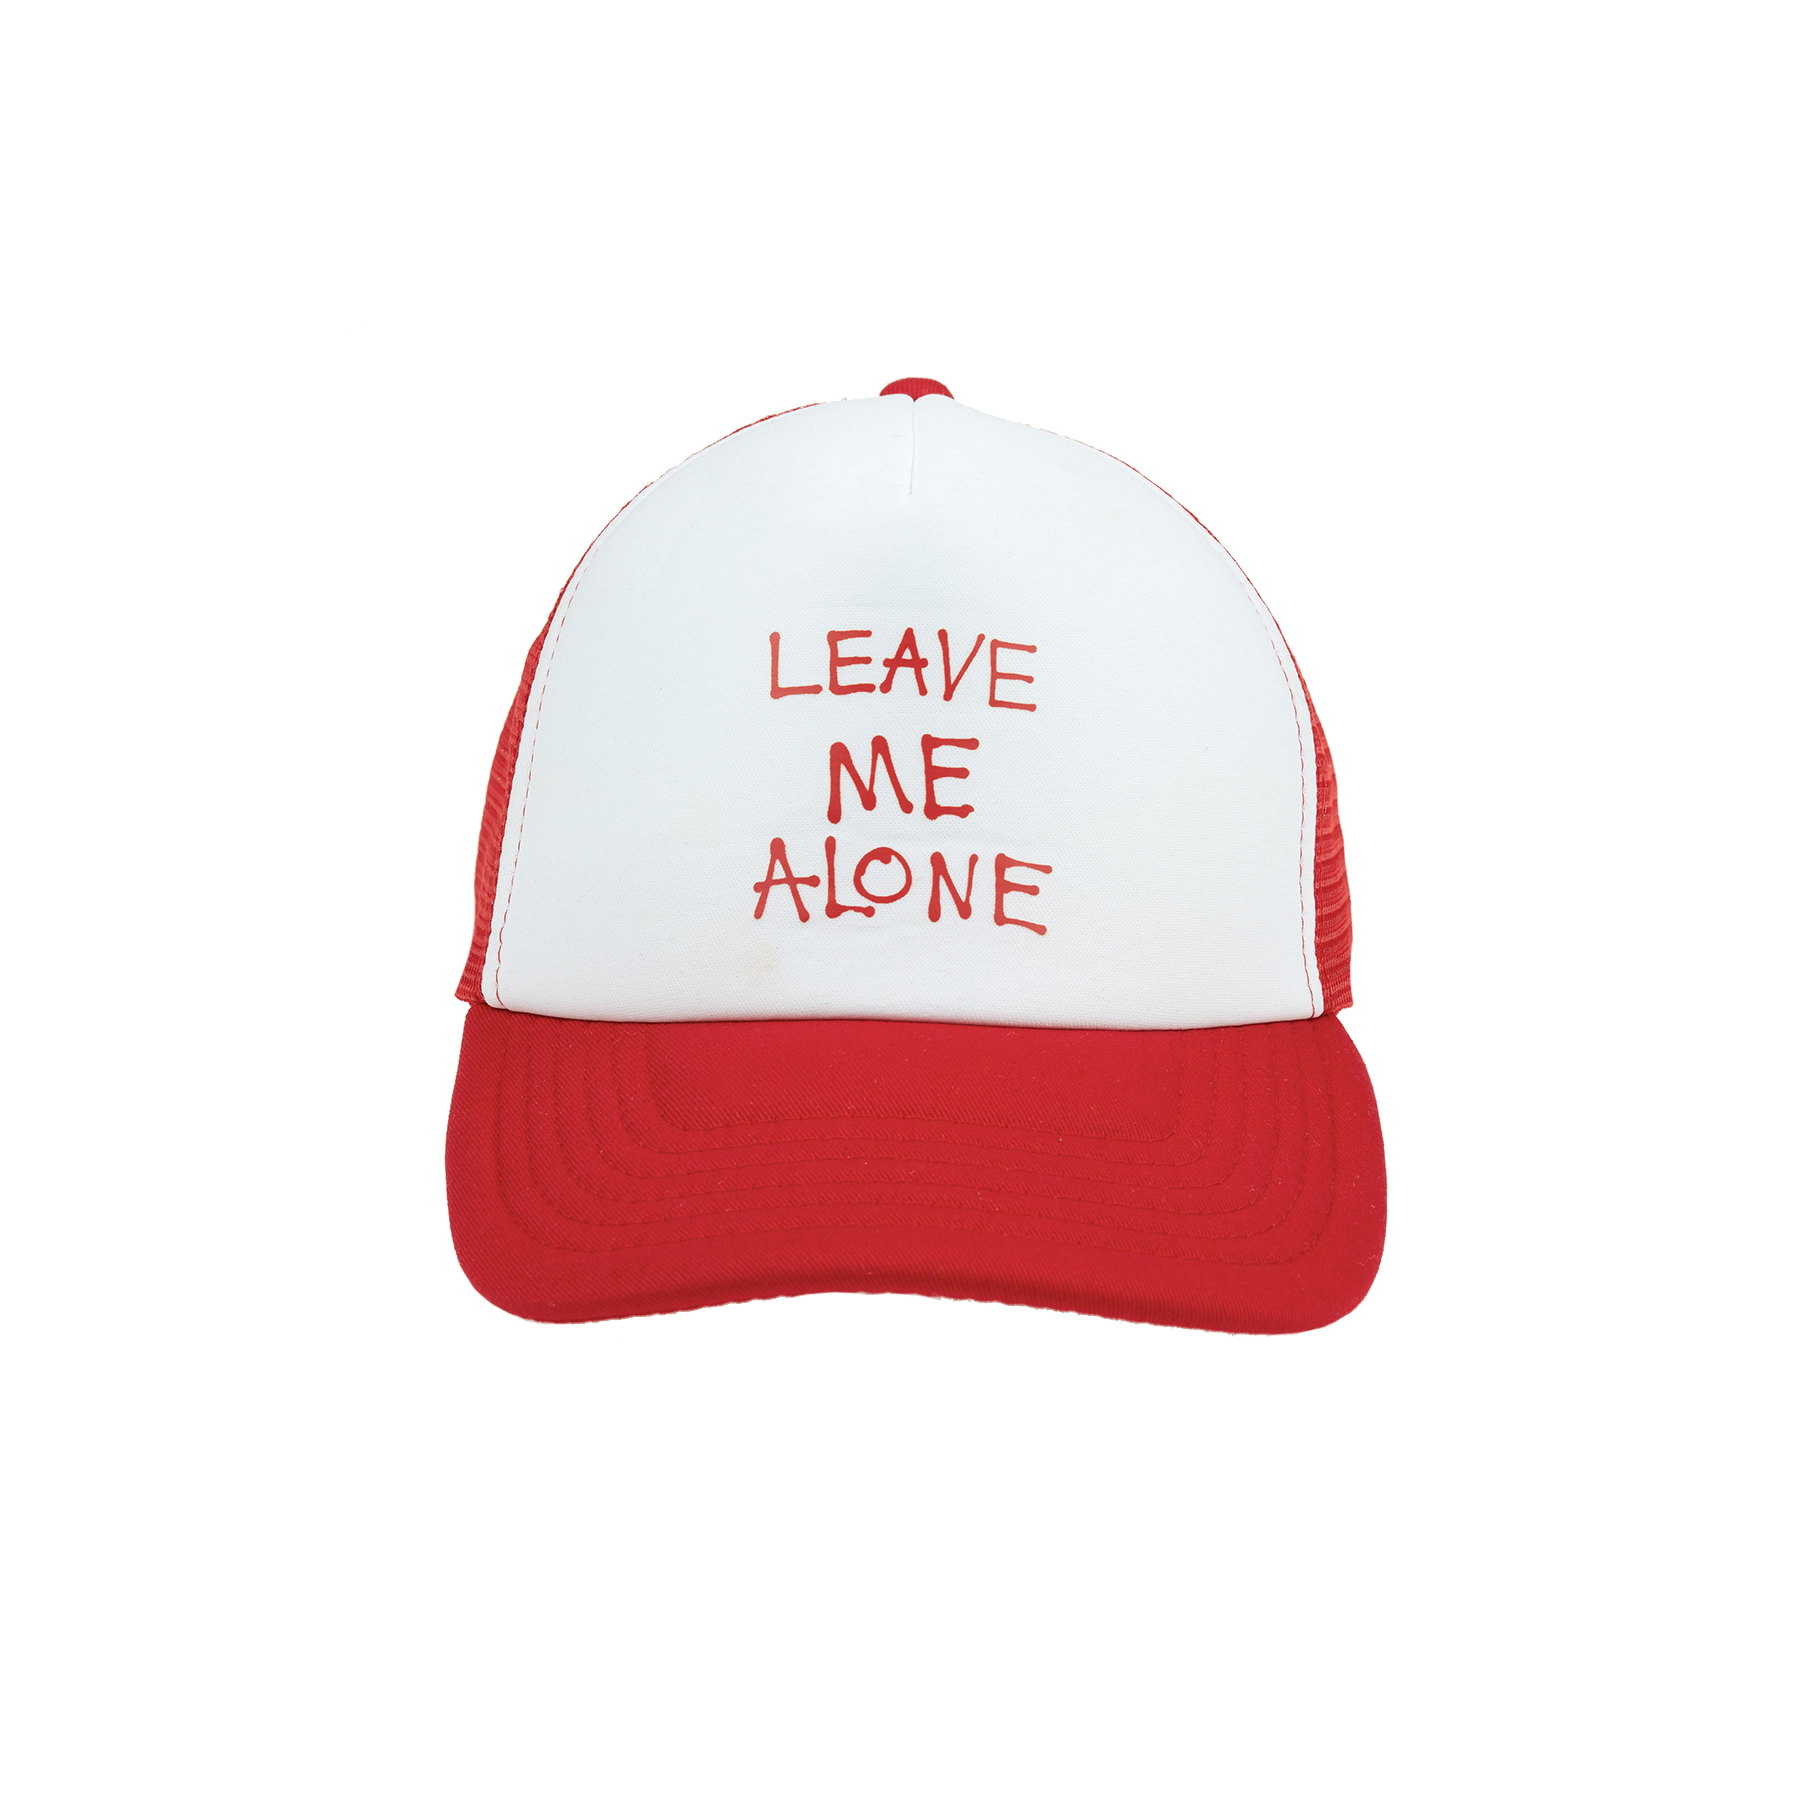 Caity Baser - Leave Me Alone Red Trucker Cap